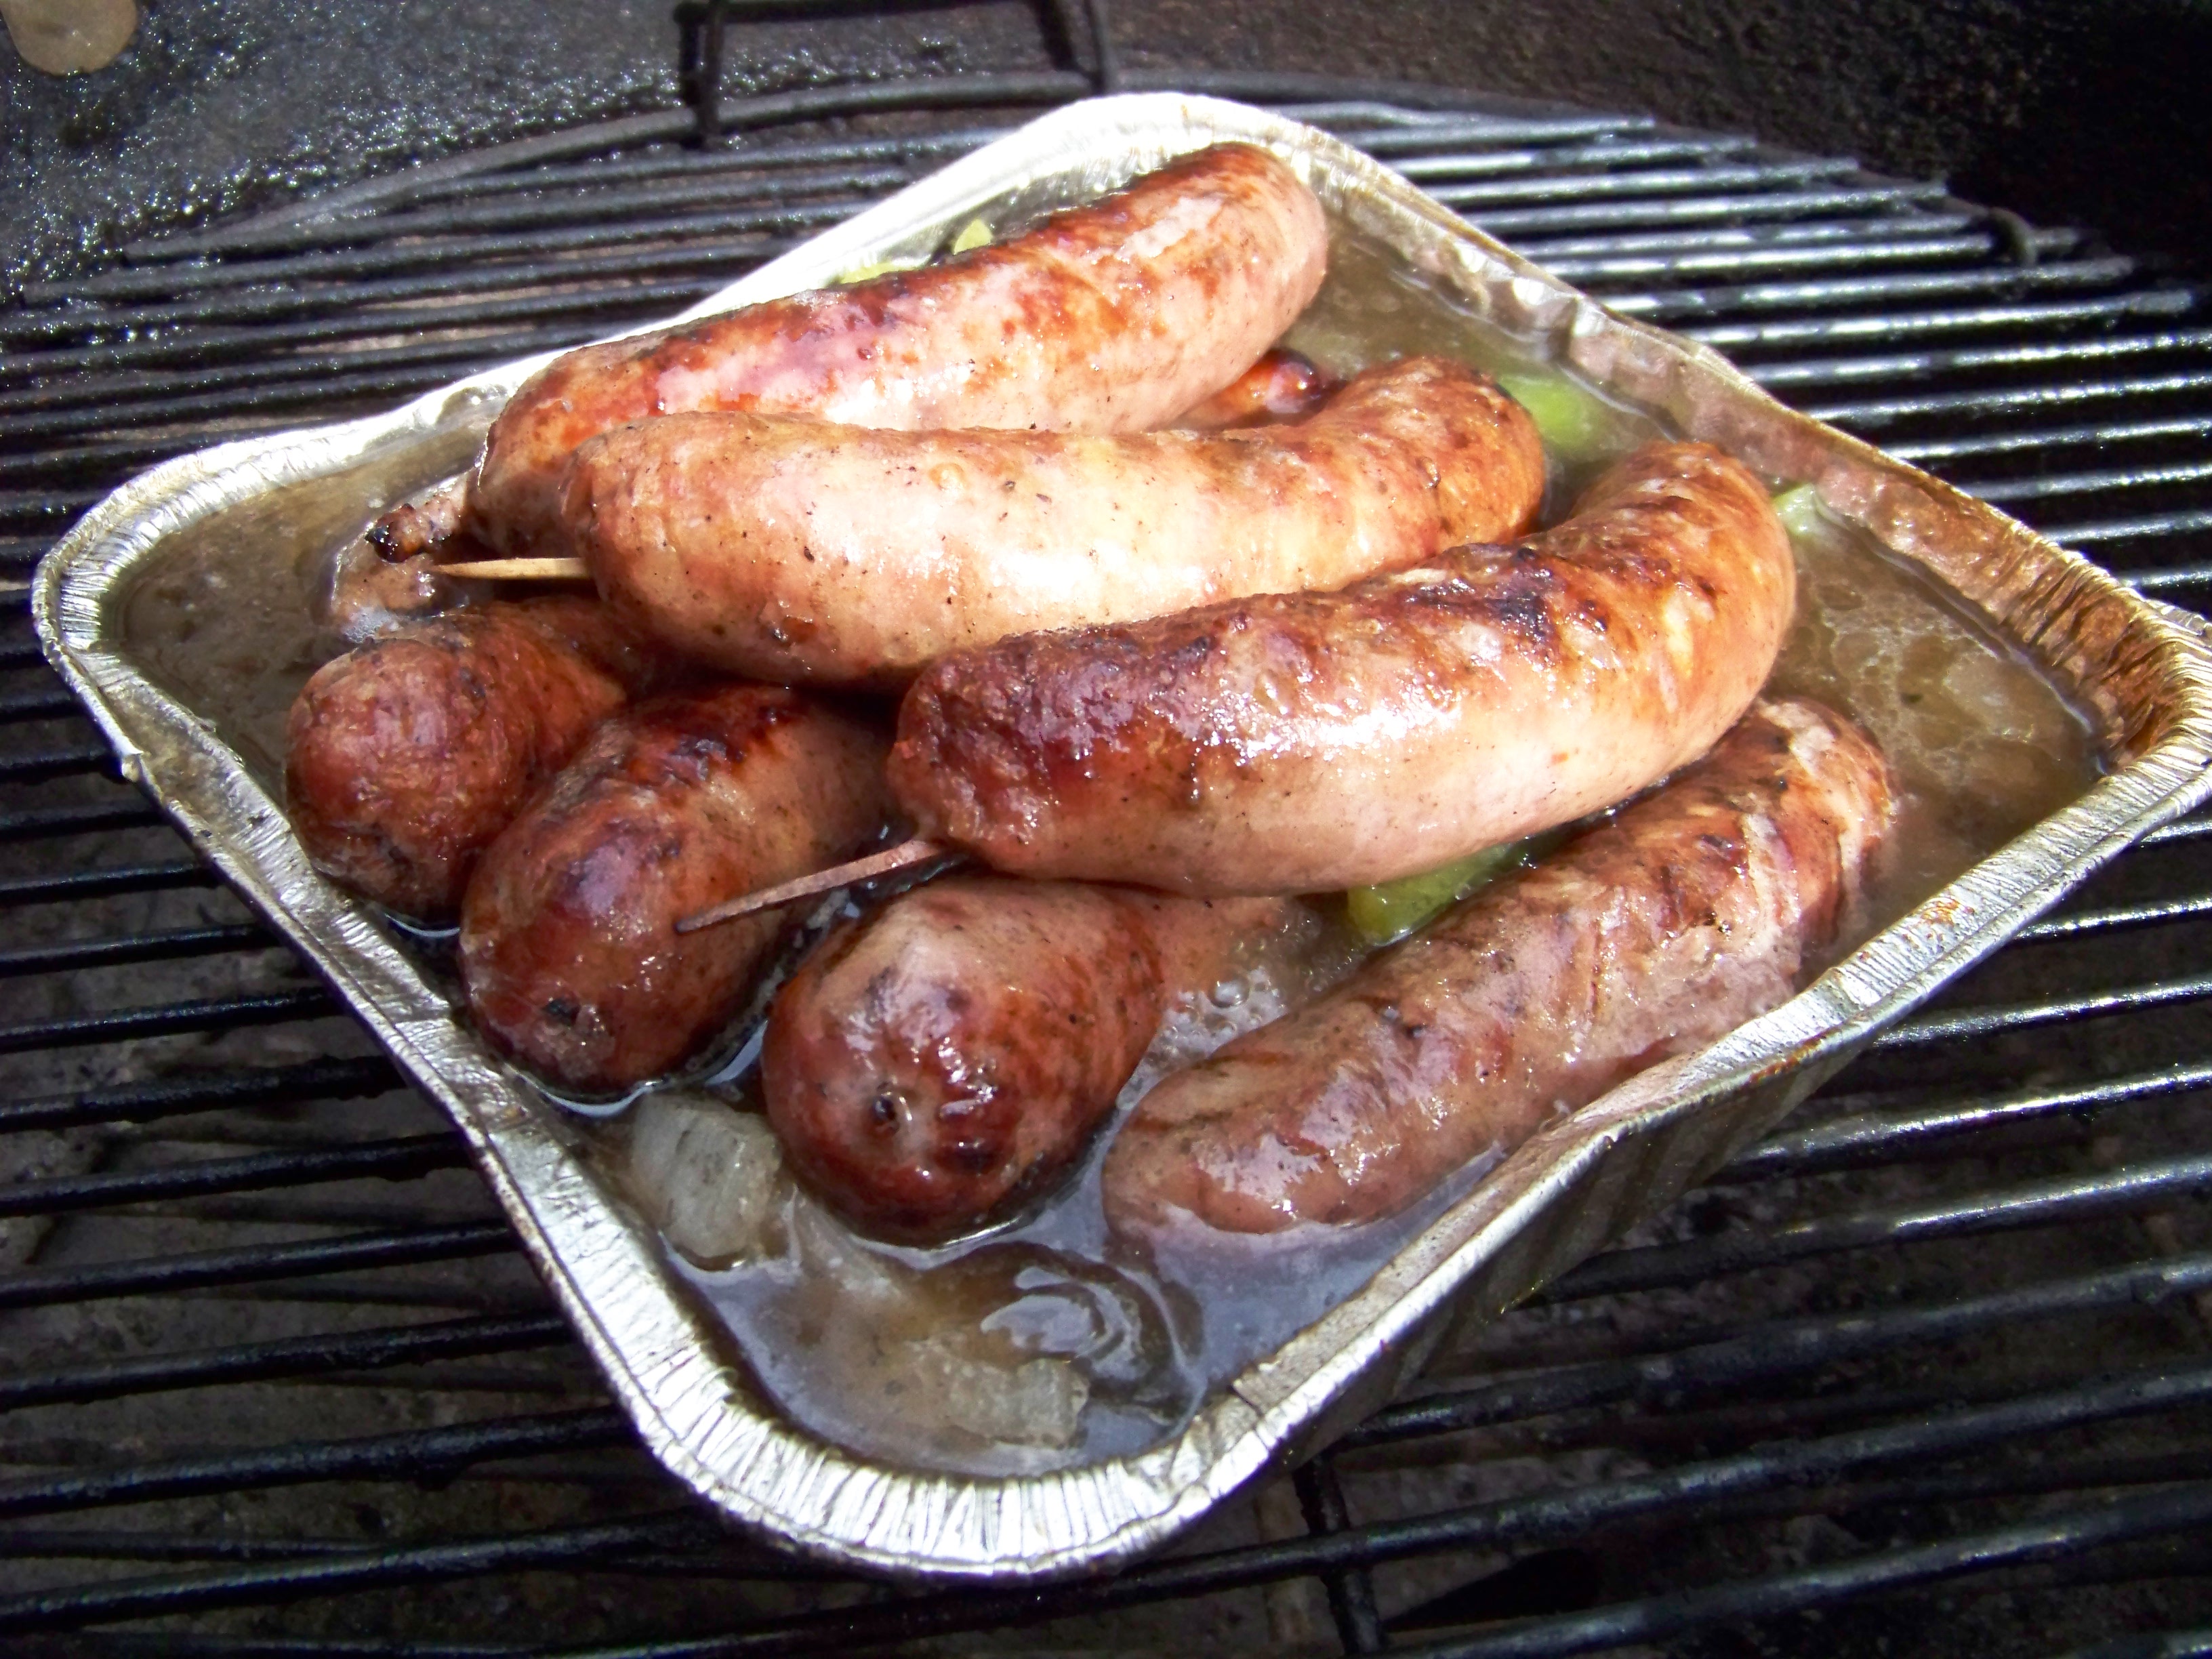 Grilled Bratwurst and Beer